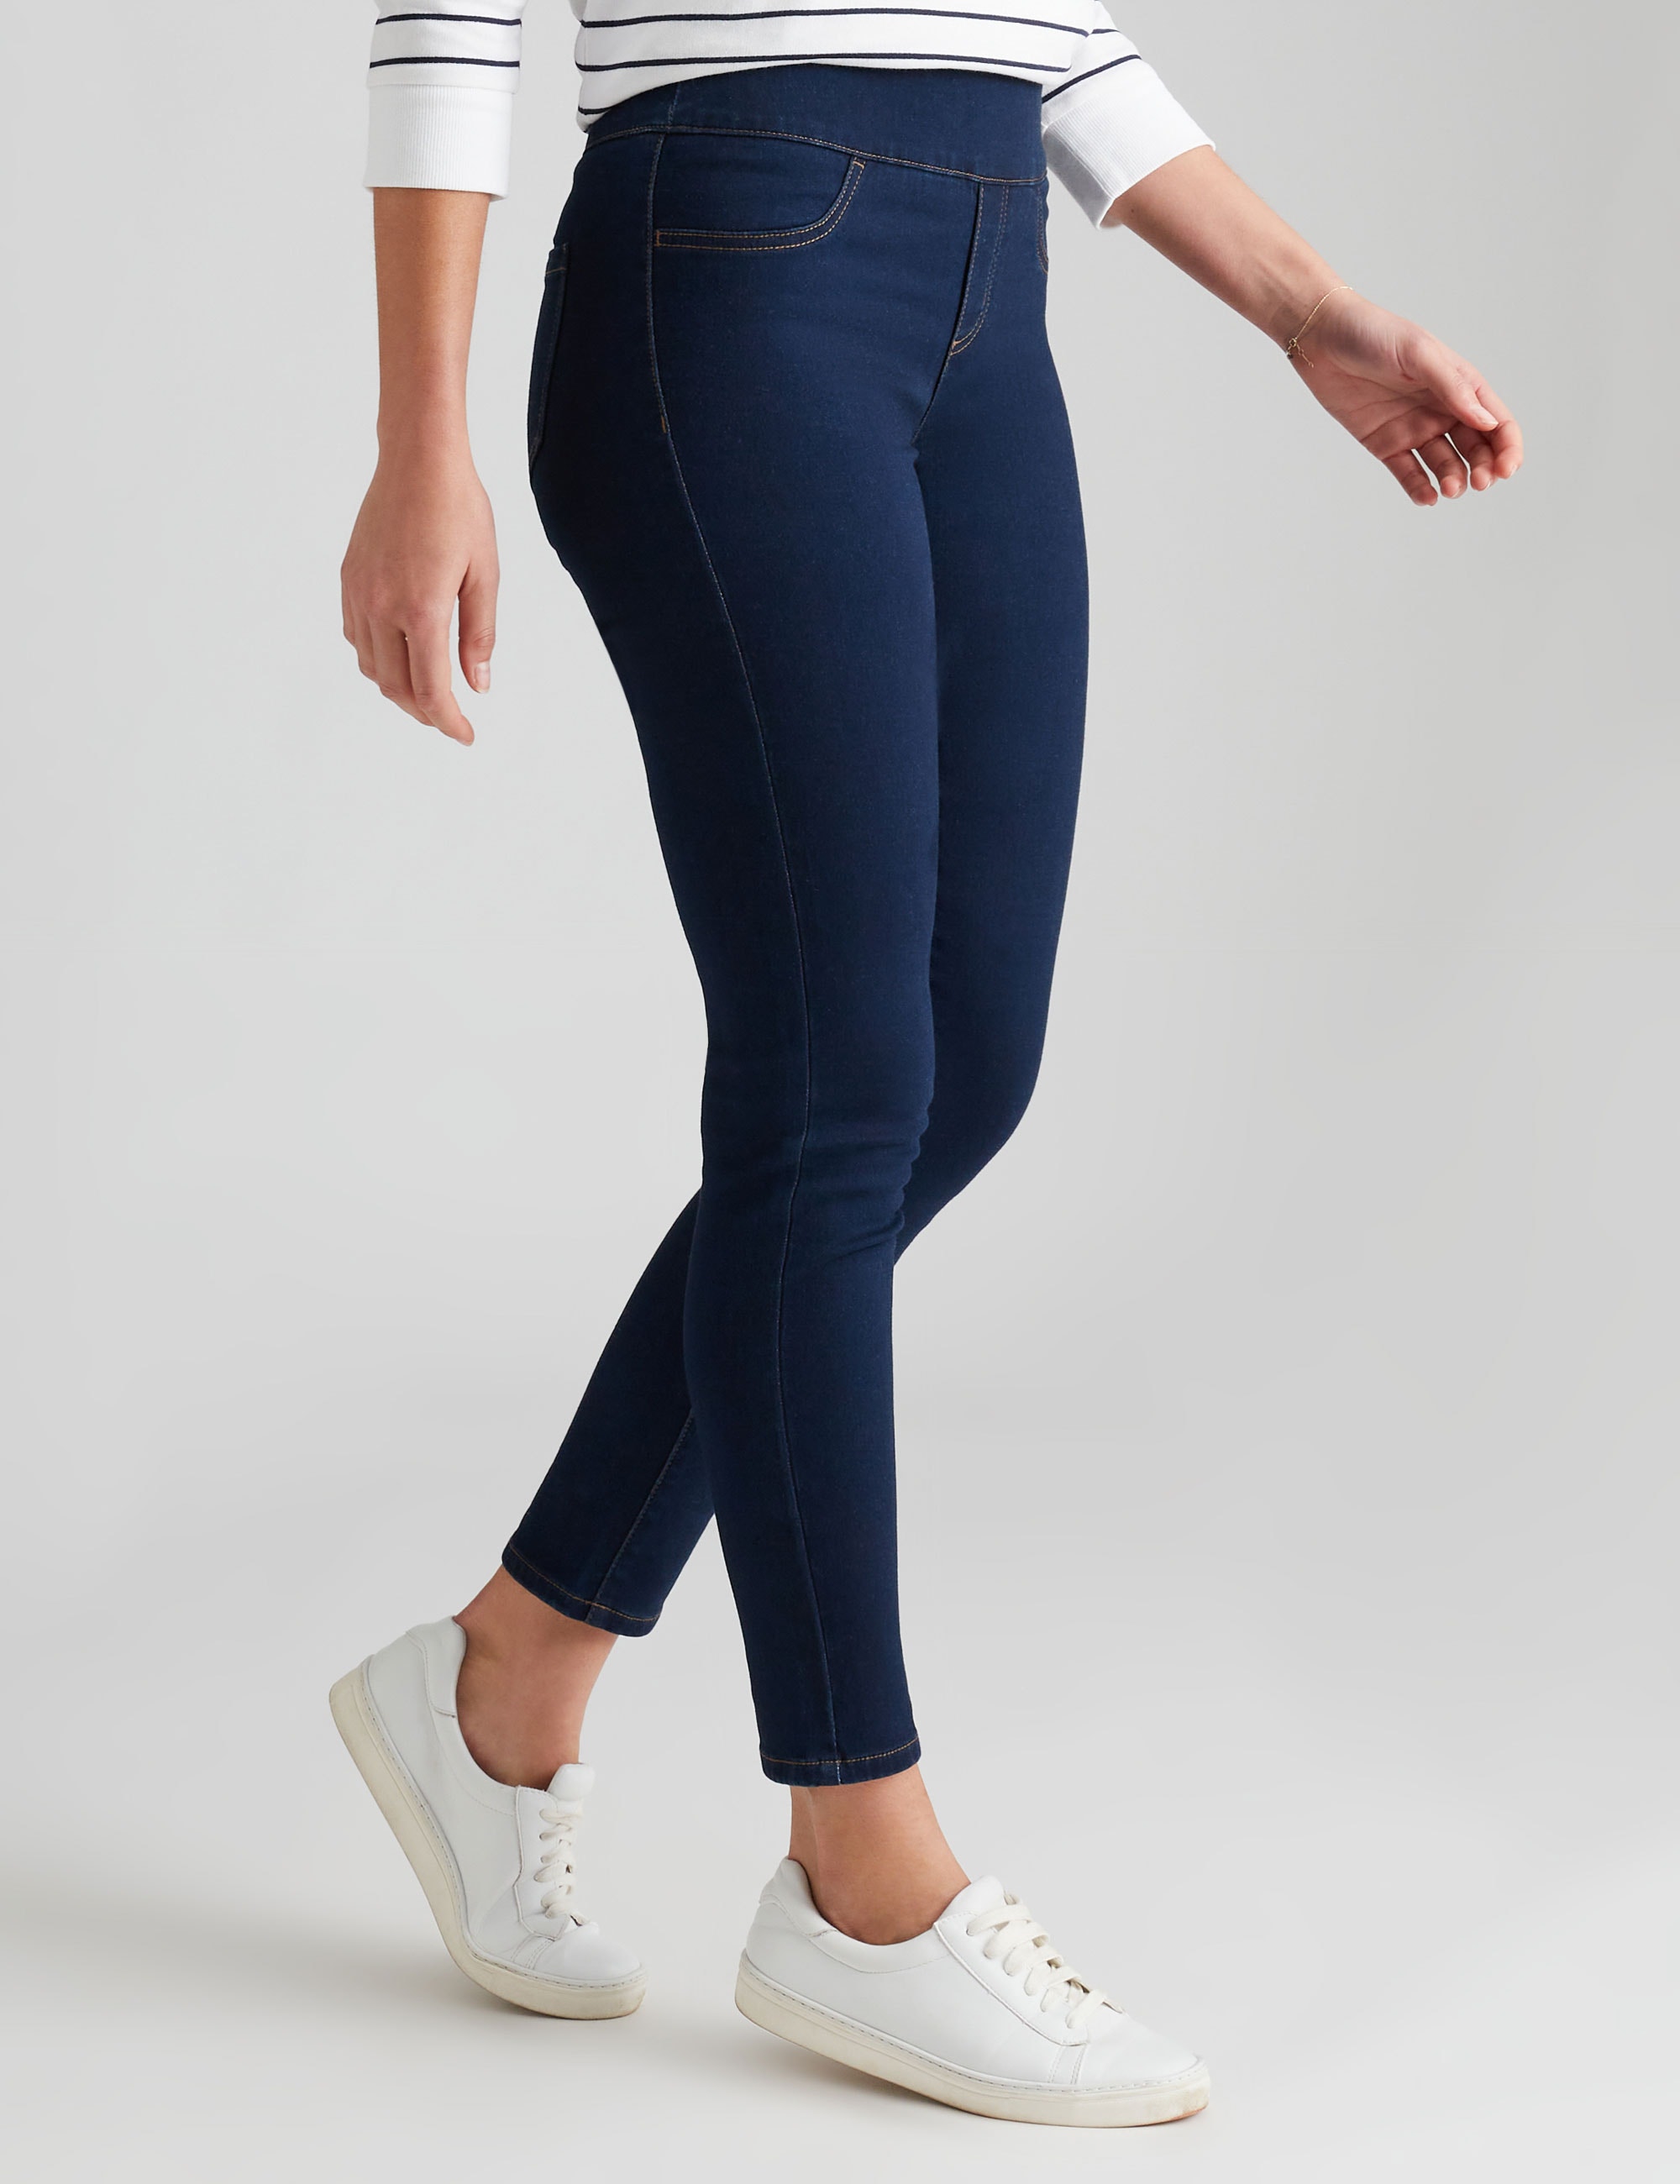 KATIES - Womens Jeans - Blue - Full Length - Knit Jeggings